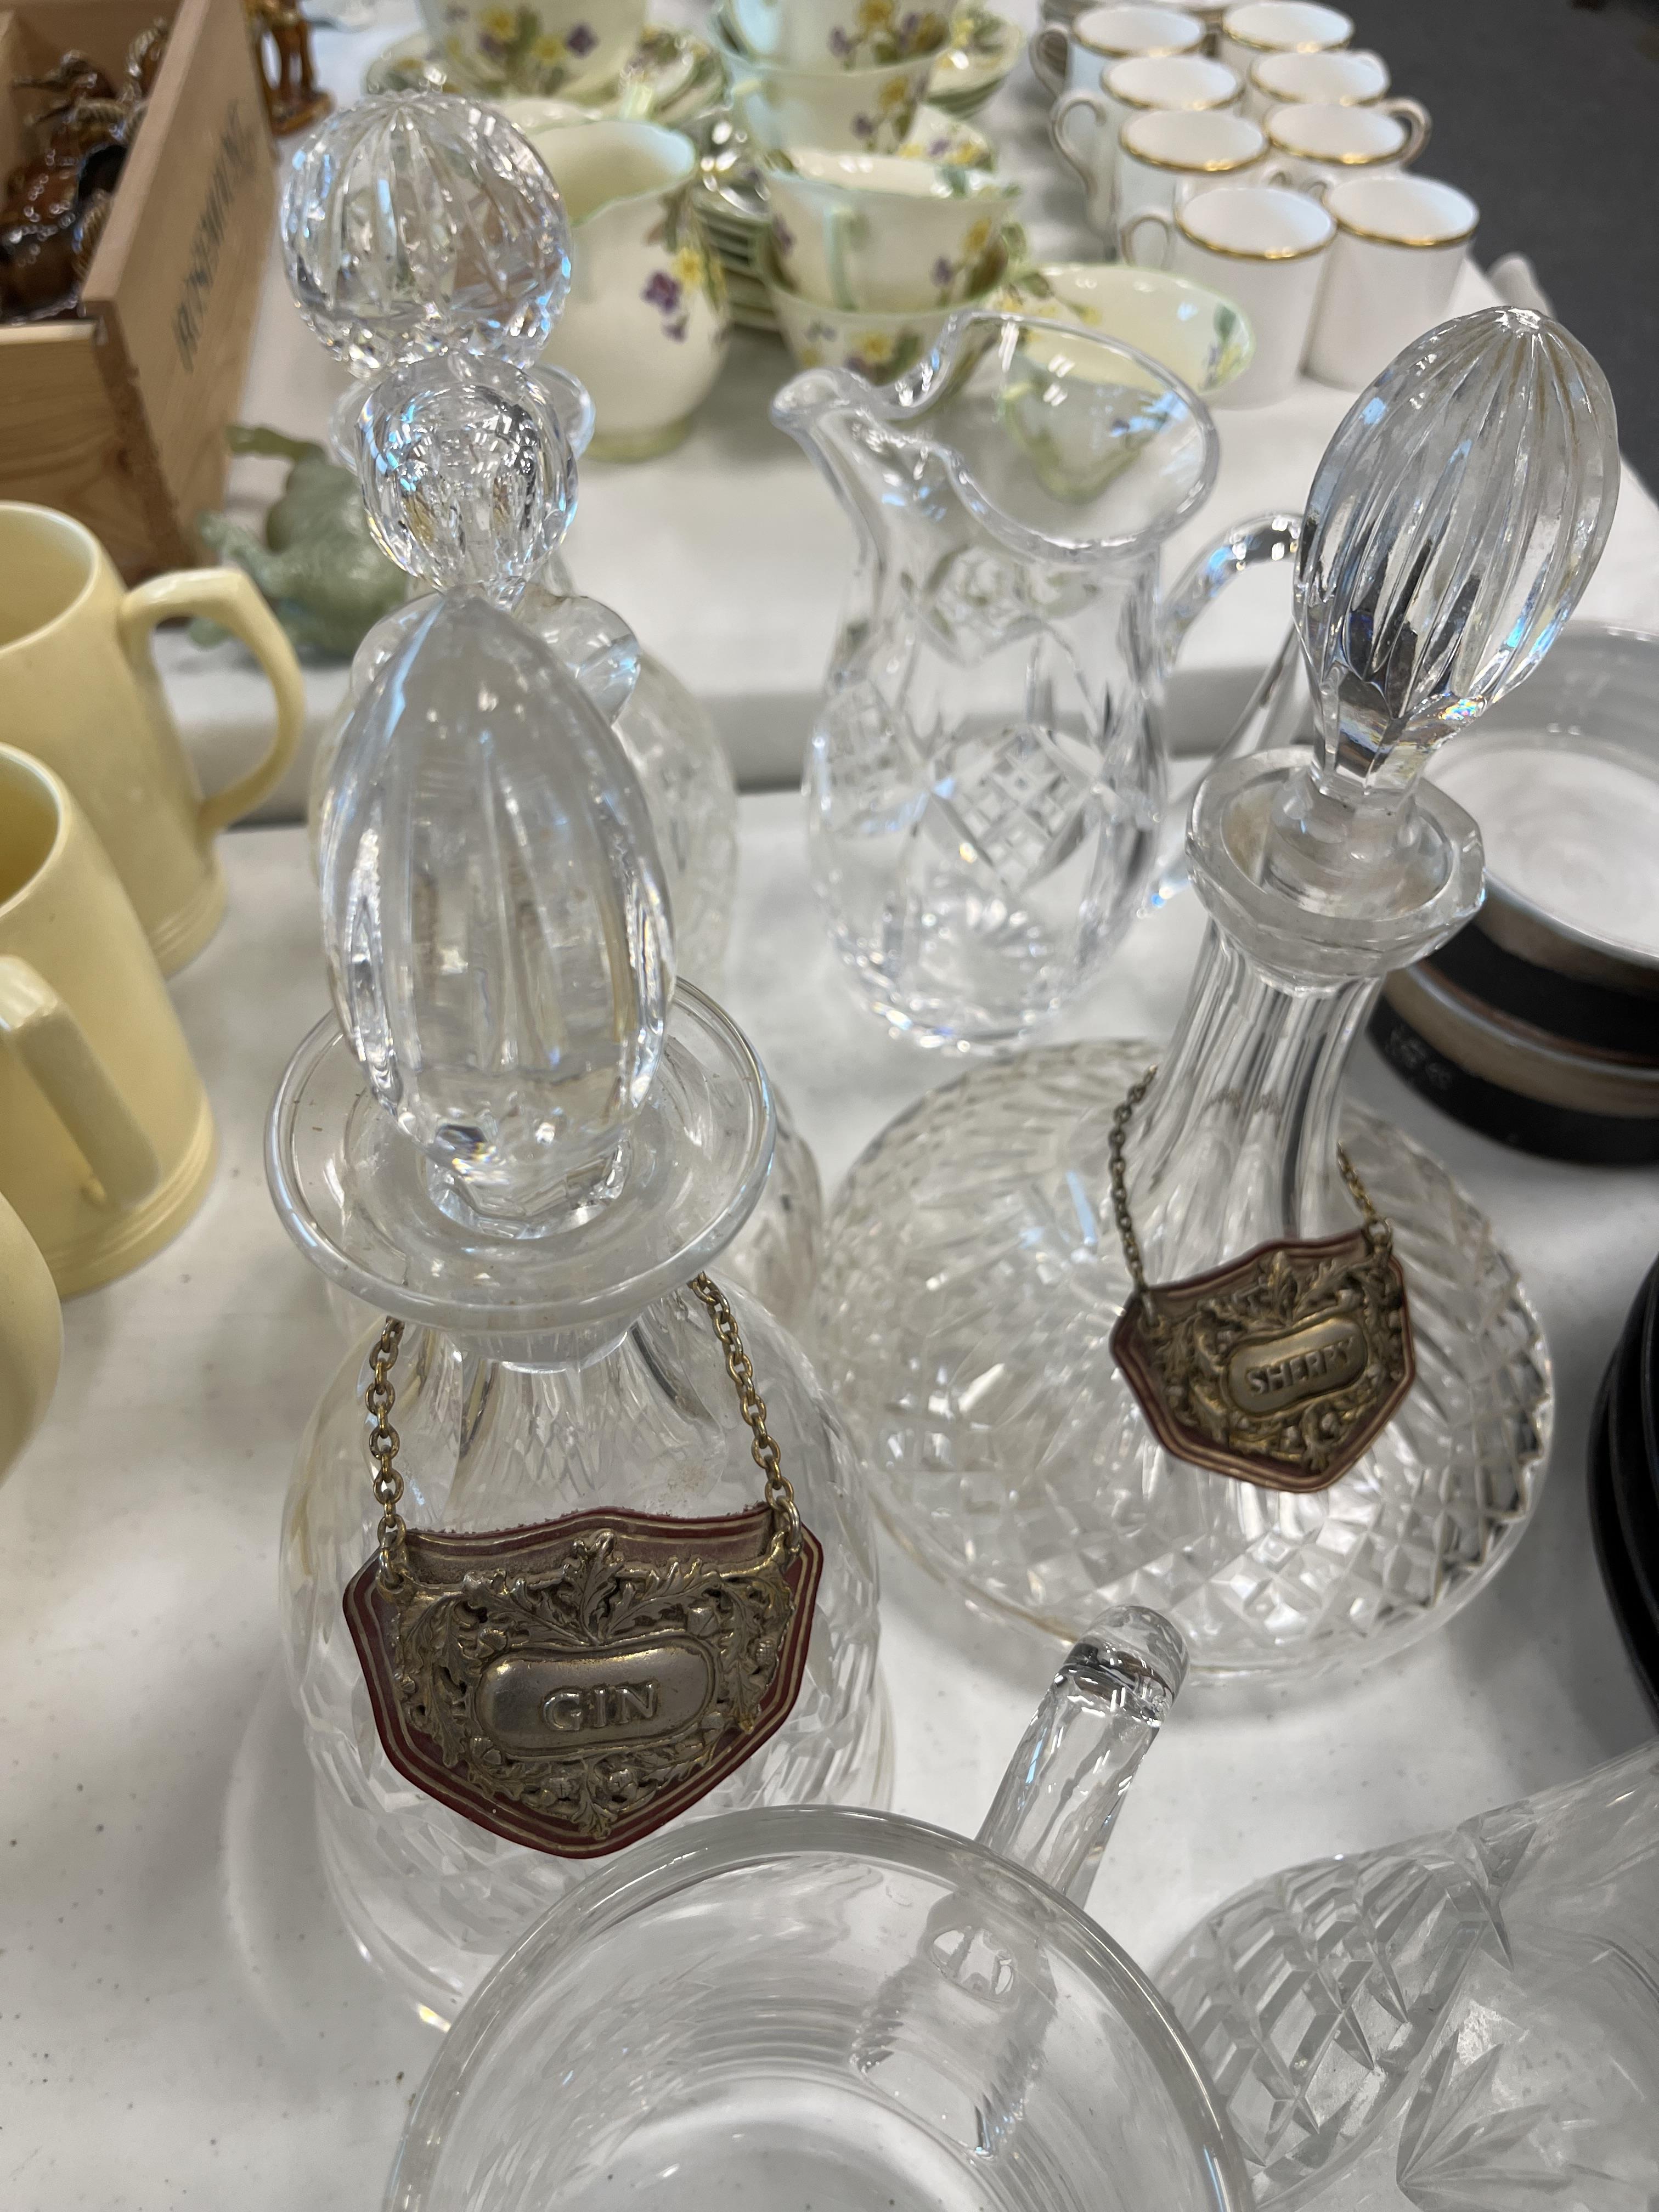 COLLECTION OF CUT GLASS DECANTERS - Image 2 of 3